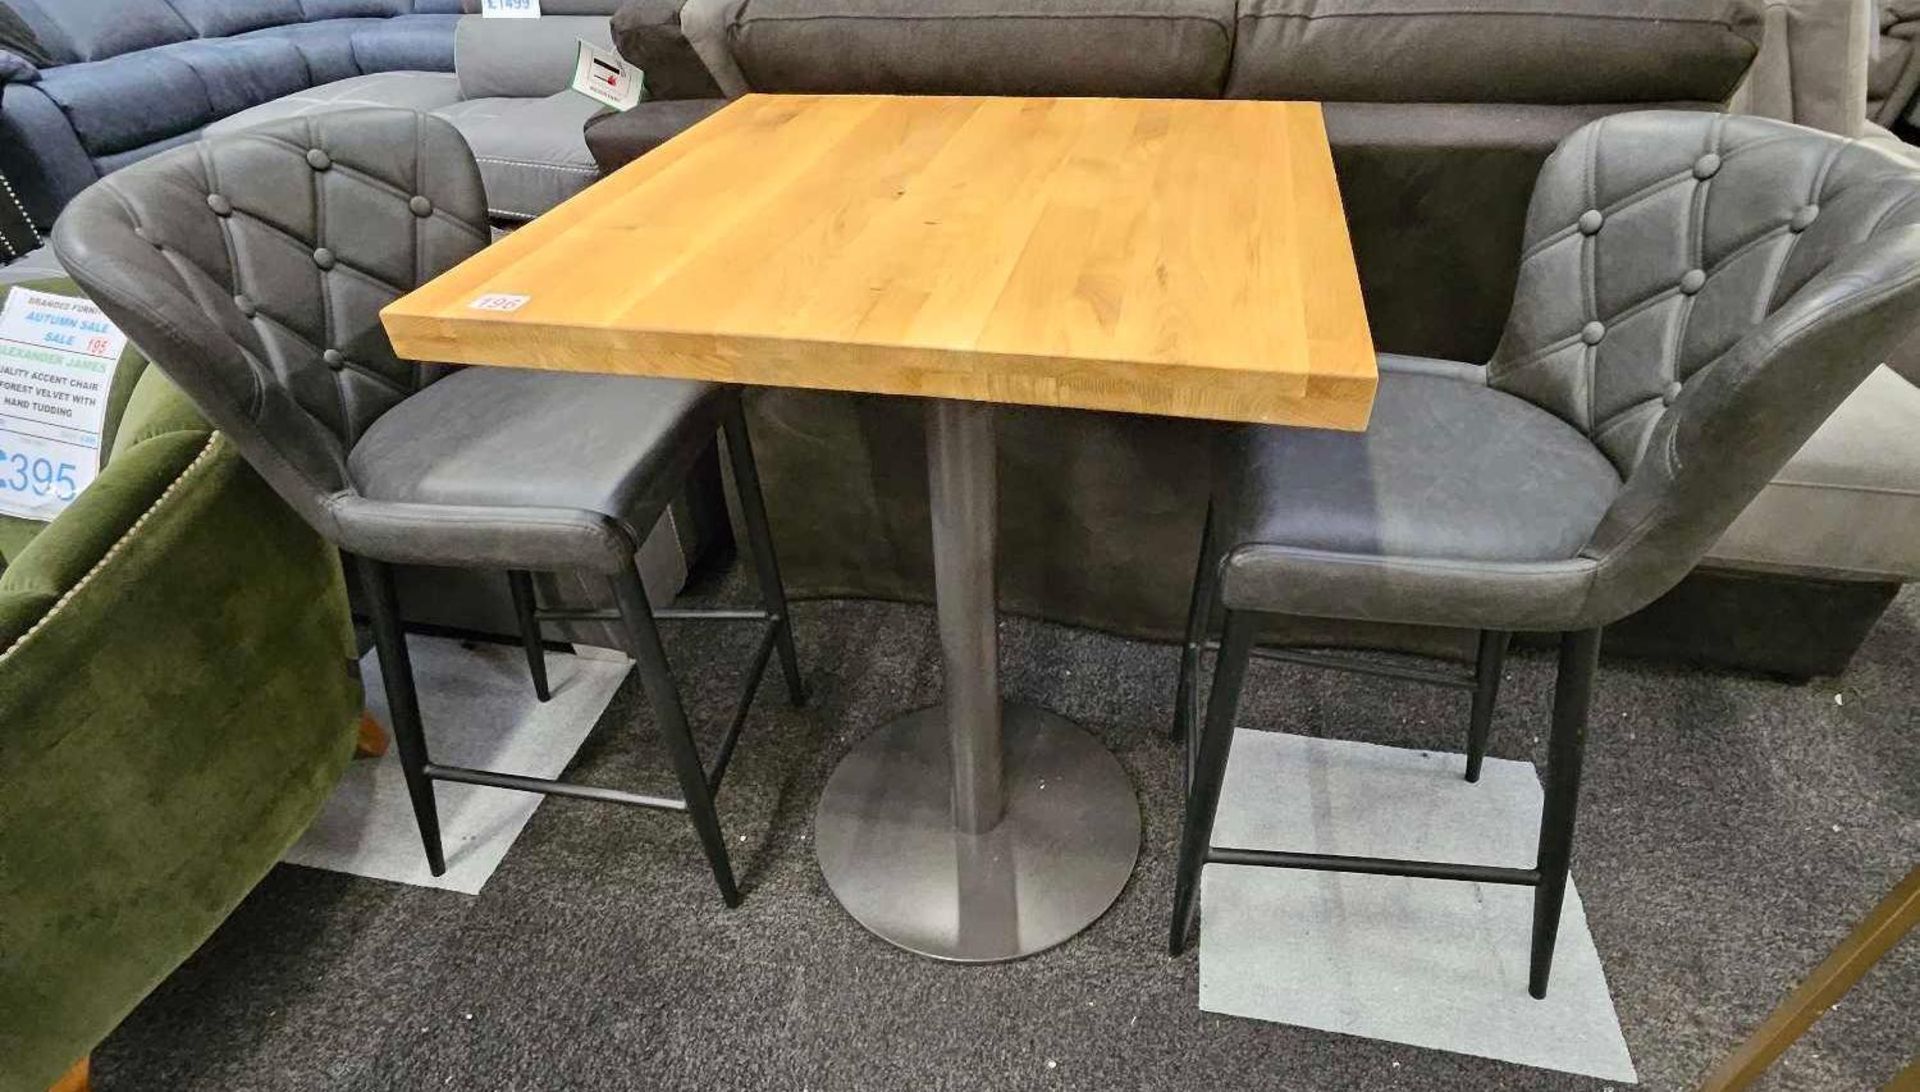 *EX DISPLAY* Furniture village solid oak top quality planked bar table with 2 rocket bar grey stools